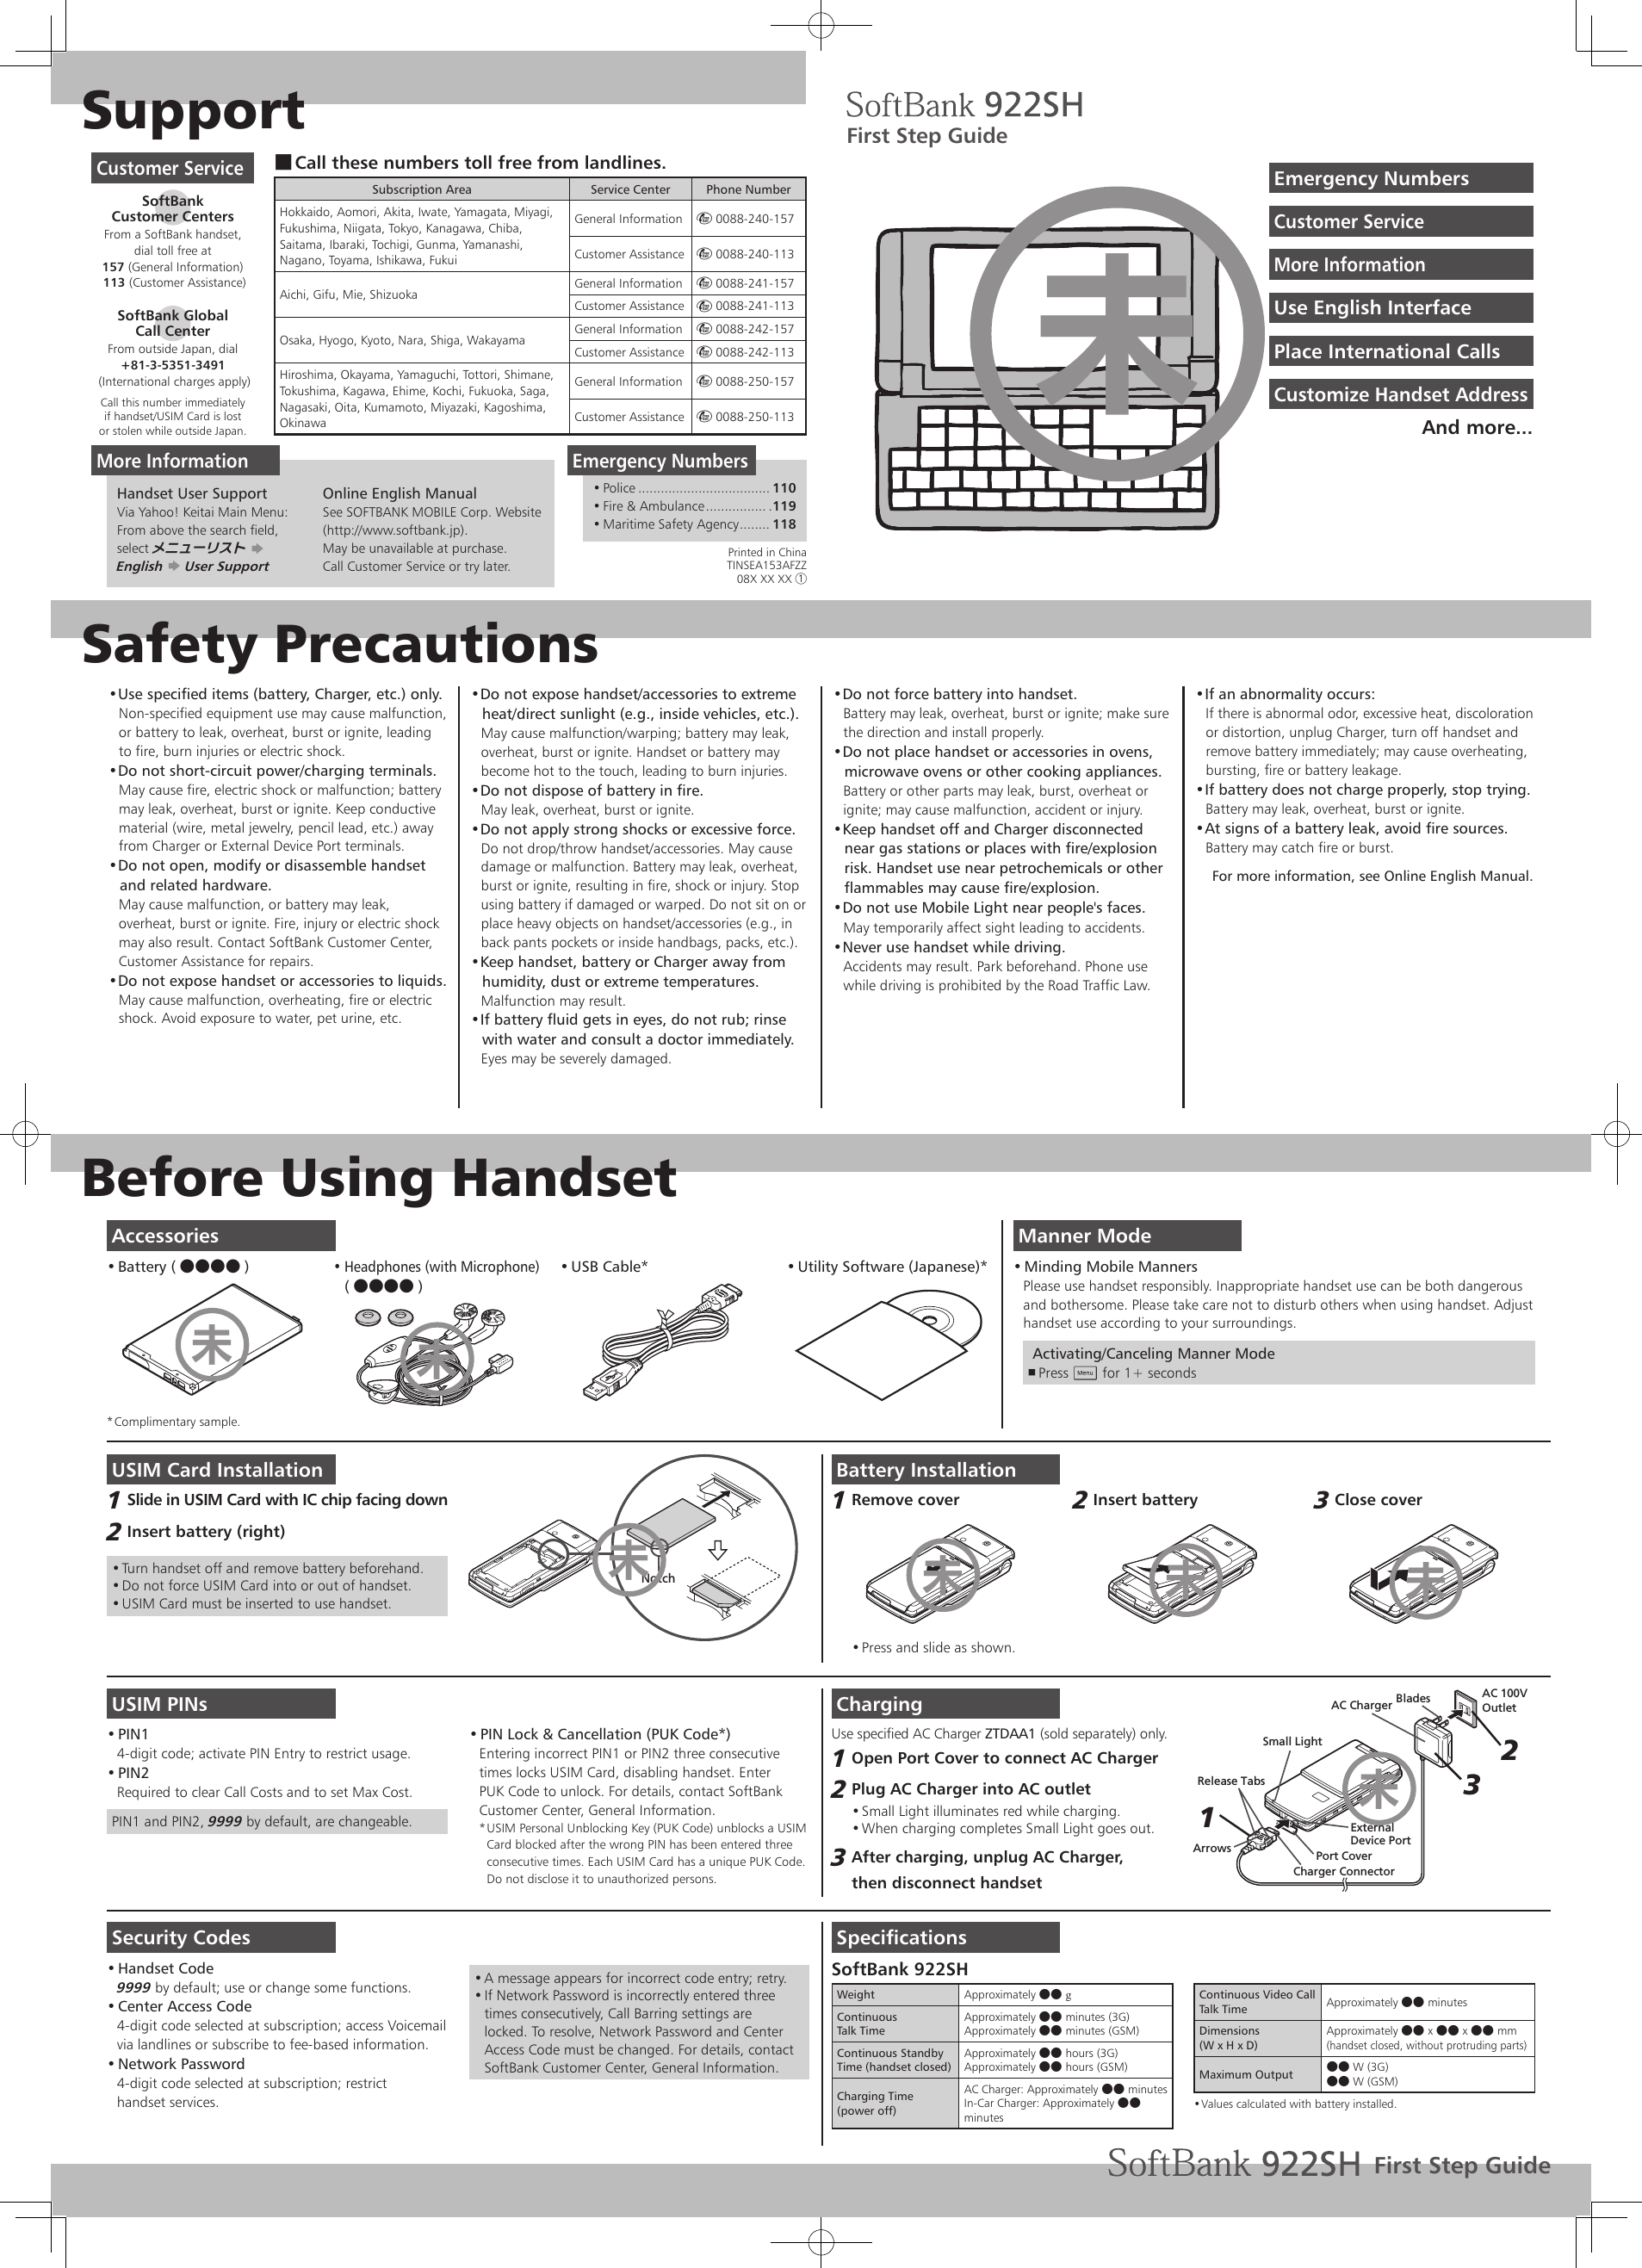 SupportSafety PrecautionsBefore Using HandsetUse specified items (battery, Charger, etc.) only.• Non-specified equipment use may cause malfunction,  or battery to leak, overheat, burst or ignite, leading to fire, burn injuries or electric shock.Do not short-circuit power/charging terminals.• May cause fire, electric shock or malfunction; battery may leak, overheat, burst or ignite. Keep conductive material (wire, metal jewelry, pencil lead, etc.) away from Charger or External Device Port terminals.Do not open, modify or disassemble handset • and related hardware.May cause malfunction, or battery may leak, overheat, burst or ignite. Fire, injury or electric shock may also result. Contact SoftBank Customer Center, Customer Assistance for repairs.Do not expose handset or accessories to liquids.• May cause malfunction, overheating, fire or electric shock. Avoid exposure to water, pet urine, etc.Do not expose handset/accessories to extreme • heat/direct sunlight (e.g., inside vehicles, etc.).May cause malfunction/warping; battery may leak, overheat, burst or ignite. Handset or battery may become hot to the touch, leading to burn injuries.Do not dispose of battery in fire.• May leak, overheat, burst or ignite.Do not apply strong shocks or excessive force.• Do not drop/throw handset/accessories. May cause damage or malfunction. Battery may leak, overheat, burst or ignite, resulting in fire, shock or injury. Stop using battery if damaged or warped. Do not sit on or place heavy objects on handset/accessories (e.g., in back pants pockets or inside handbags, packs, etc.).Keep handset, battery or Charger away from • humidity, dust or extreme temperatures.Malfunction may result.If battery fluid gets in eyes, do not rub; rinse • with water and consult a doctor immediately.Eyes may be severely damaged.Do not force battery into handset.• Battery may leak, overheat, burst or ignite; make sure the direction and install properly.Do not place handset or accessories in ovens, • microwave ovens or other cooking appliances.Battery or other parts may leak, burst, overheat or ignite; may cause malfunction, accident or injury.Keep handset off and Charger disconnected • near gas stations or places with fire/explosion risk. Handset use near petrochemicals or other flammables may cause fire/explosion.Do not use Mobile Light near people&apos;s faces.• May temporarily affect sight leading to accidents.Never use handset while driving.• Accidents may result. Park beforehand. Phone use while driving is prohibited by the Road Traffic Law.If an abnormality occurs:• If there is abnormal odor, excessive heat, discoloration or distortion, unplug Charger, turn off handset and remove battery immediately; may cause overheating, bursting, fire or battery leakage.If battery does not charge properly, stop trying.• Battery may leak, overheat, burst or ignite.At signs of a battery leak, avoid fire sources.• Battery may catch fire or burst.For more information, see Online English Manual.Manner ModeMinding Mobile Manners• Please use handset responsibly. Inappropriate handset use can be both dangerousand bothersome. Please take care not to disturb others when using handset. Adjusthandset use according to your surroundings. Activating/Canceling Manner ModePress  , C for 1+ secondsUSIM Card InstallationSlide in USIM Card with IC chip facing down1 Insert battery (right)2 Turn handset off and remove battery beforehand.• Do not force USIM Card into or out of handset.• USIM Card must be inserted to use handset.• NotchUSIM PINsPIN1• 4-digit code; activate PIN Entry to restrict usage.PIN2• Required to clear Call Costs and to set Max Cost.PIN1 and PIN2, 9999 by default, are changeable.PIN Lock &amp; Cancellation (PUK Code*)• Entering incorrect PIN1 or PIN2 three consecutivetimes locks USIM Card, disabling handset. EnterPUK Code to unlock. For details, contact SoftBank Customer Center, General Information.USIM Personal Unblocking Key (PUK Code) unblocks a USIM * Card blocked after the wrong PIN has been entered three consecutive times. Each USIM Card has a unique PUK Code.  Do not disclose it to unauthorized persons.Security CodesHandset Code• 9999 by default; use or change some functions.Center Access Code• 4-digit code selected at subscription; access Voicemail via landlines or subscribe to fee-based information.Network Password• 4-digit code selected at subscription; restrict handset services.A message appears for incorrect code entry; retry.• If Network Password is incorrectly entered three • times consecutively, Call Barring settings are locked. To resolve, Network Password and Center Access Code must be changed. For details, contact SoftBank Customer Center, General Information.Battery InstallationRemove cover1 Press and slide as shown.• Insert battery2 Close cover3 ChargingUse specified AC Charger ZTDAA1 (sold separately) only.Open Port Cover to connect AC Charger1 Plug AC Charger into AC outlet2 Small Light illuminates red while charging.• When charging completes Small Light goes out.• After charging, unplug AC Charger, 3 then disconnect handsetAC 100VOutletBladesAC ChargerPort CoverRelease TabsCharger ConnectorArrowsSmall LightExternalDevice Port213SpecificationsSoftBank 922SHWeight Approximately ●● gContinuousTalk TimeApproximately ●● minutes (3G)Approximately ●● minutes (GSM)Continuous Standby Time (handset closed)Approximately ●● hours (3G)Approximately ●● hours (GSM)Charging Time(power off)AC Charger: Approximately ●● minutesIn-Car Charger: Approximately ●● minutesContinuous Video Call Talk Time Approximately ●● minutesDimensions(W x H x D)Approximately ●● x ●● x ●● mm(handset closed, without protruding parts)Maximum Output ●● W (3G)●● W (GSM)Values calculated with battery installed.• Call these numbers toll free from landlines. ■Subscription Area Service Center Phone NumberHokkaido, Aomori, Akita, Iwate, Yamagata, Miyagi, Fukushima, Niigata, Tokyo, Kanagawa, Chiba, Saitama, Ibaraki, Tochigi, Gunma, Yamanashi, Nagano, Toyama, Ishikawa, FukuiGeneral Information m 0088-240-157Customer Assistance m 0088-240-113Aichi, Gifu, Mie, Shizuoka General Information m 0088-241-157Customer Assistance m 0088-241-113Osaka, Hyogo, Kyoto, Nara, Shiga, Wakayama General Information m 0088-242-157Customer Assistance m 0088-242-113Hiroshima, Okayama, Yamaguchi, Tottori, Shimane, Tokushima, Kagawa, Ehime, Kochi, Fukuoka, Saga, Nagasaki, Oita, Kumamoto, Miyazaki, Kagoshima, OkinawaGeneral Information m 0088-250-157Customer Assistance m 0088-250-113Customer ServiceSoftBank  Customer CentersFrom a SoftBank handset, dial toll free at157 (General Information) 113 (Customer Assistance)SoftBank Global  Call CenterFrom outside Japan, dial+81-3-5351-3491 (International charges apply)Call this number immediatelyif handset/USIM Card is lostor stolen while outside Japan.Emergency NumbersPolice•   ................................... 110Fire &amp; Ambulance•   ................ .119Maritime Safety Agency•   ........ 118First Step GuideUse English InterfaceEmergency NumbersPlace International CallsCustomer ServiceCustomize Handset AddressMore InformationAnd more...AccessoriesBattery ( ●●●● )• Headphones (with Microphone) • (●●●● )USB Cable*•  Utility Software (Japanese)*• Complimentary sample.* Printed in ChinaTINSEA153AFZZ08X XX XX ①More InformationHandset User SupportVia Yahoo! Keitai Main Menu:From above the search field, select メニューリスト S  English S User SupportOnline English ManualSee SOFTBANK MOBILE Corp. Website (http://www.softbank.jp).May be unavailable at purchase. Call Customer Service or try later.未未未未未未未First Step Guide未